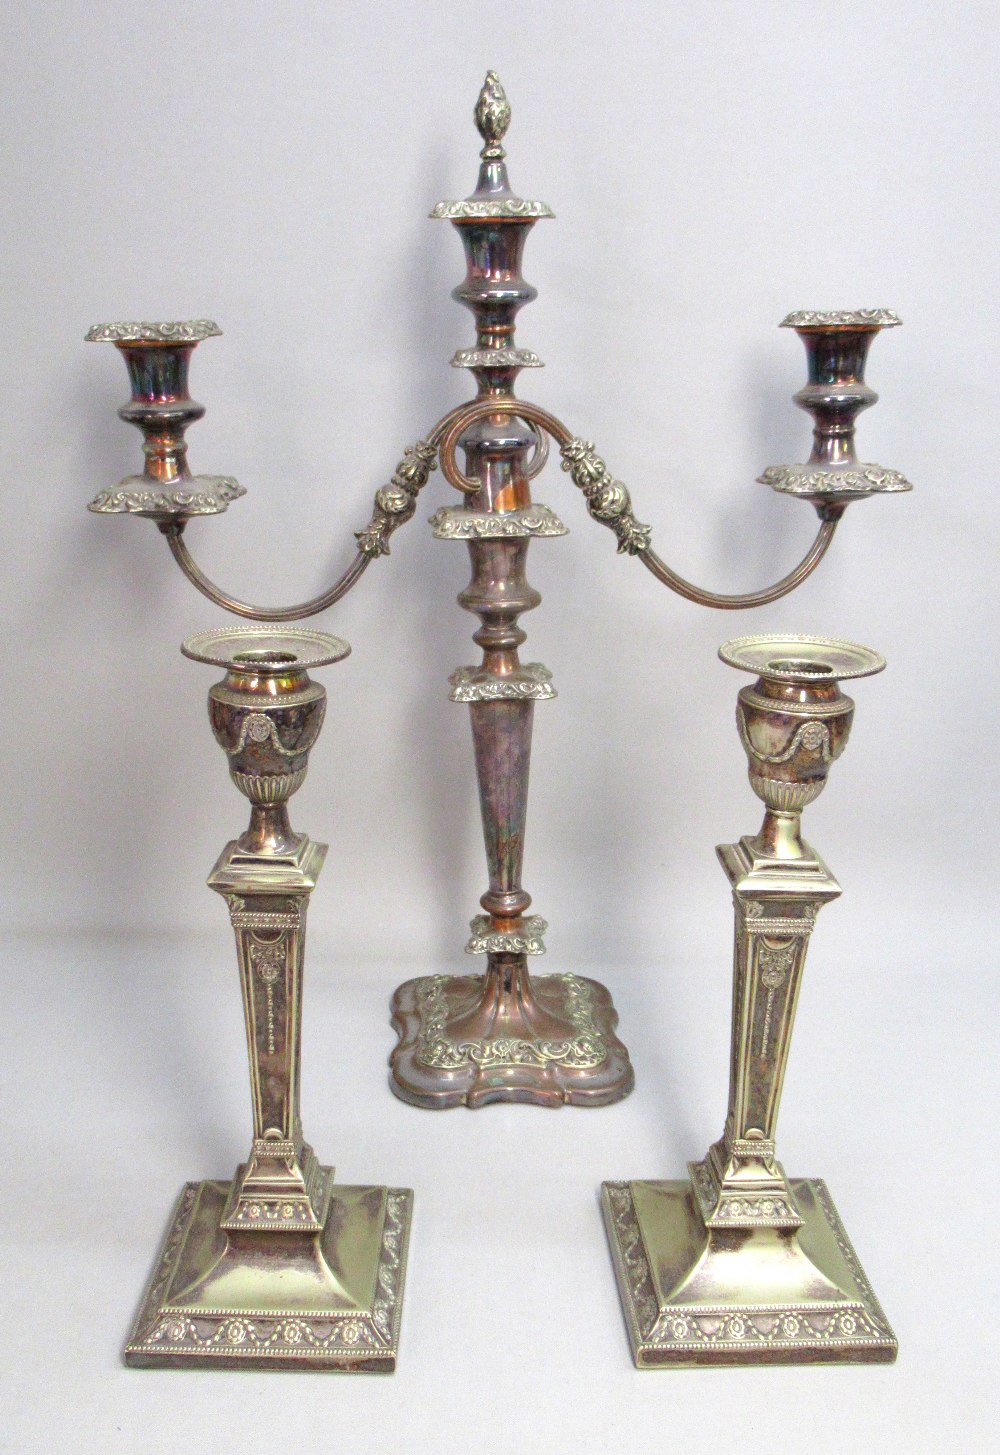 PAIR OF EDWARDIAN SILVER PLATED ADAM STYLE CANDLESTICKS BY HENRY EYRE & Co. (H: 28.5cm), THREE LIGHT